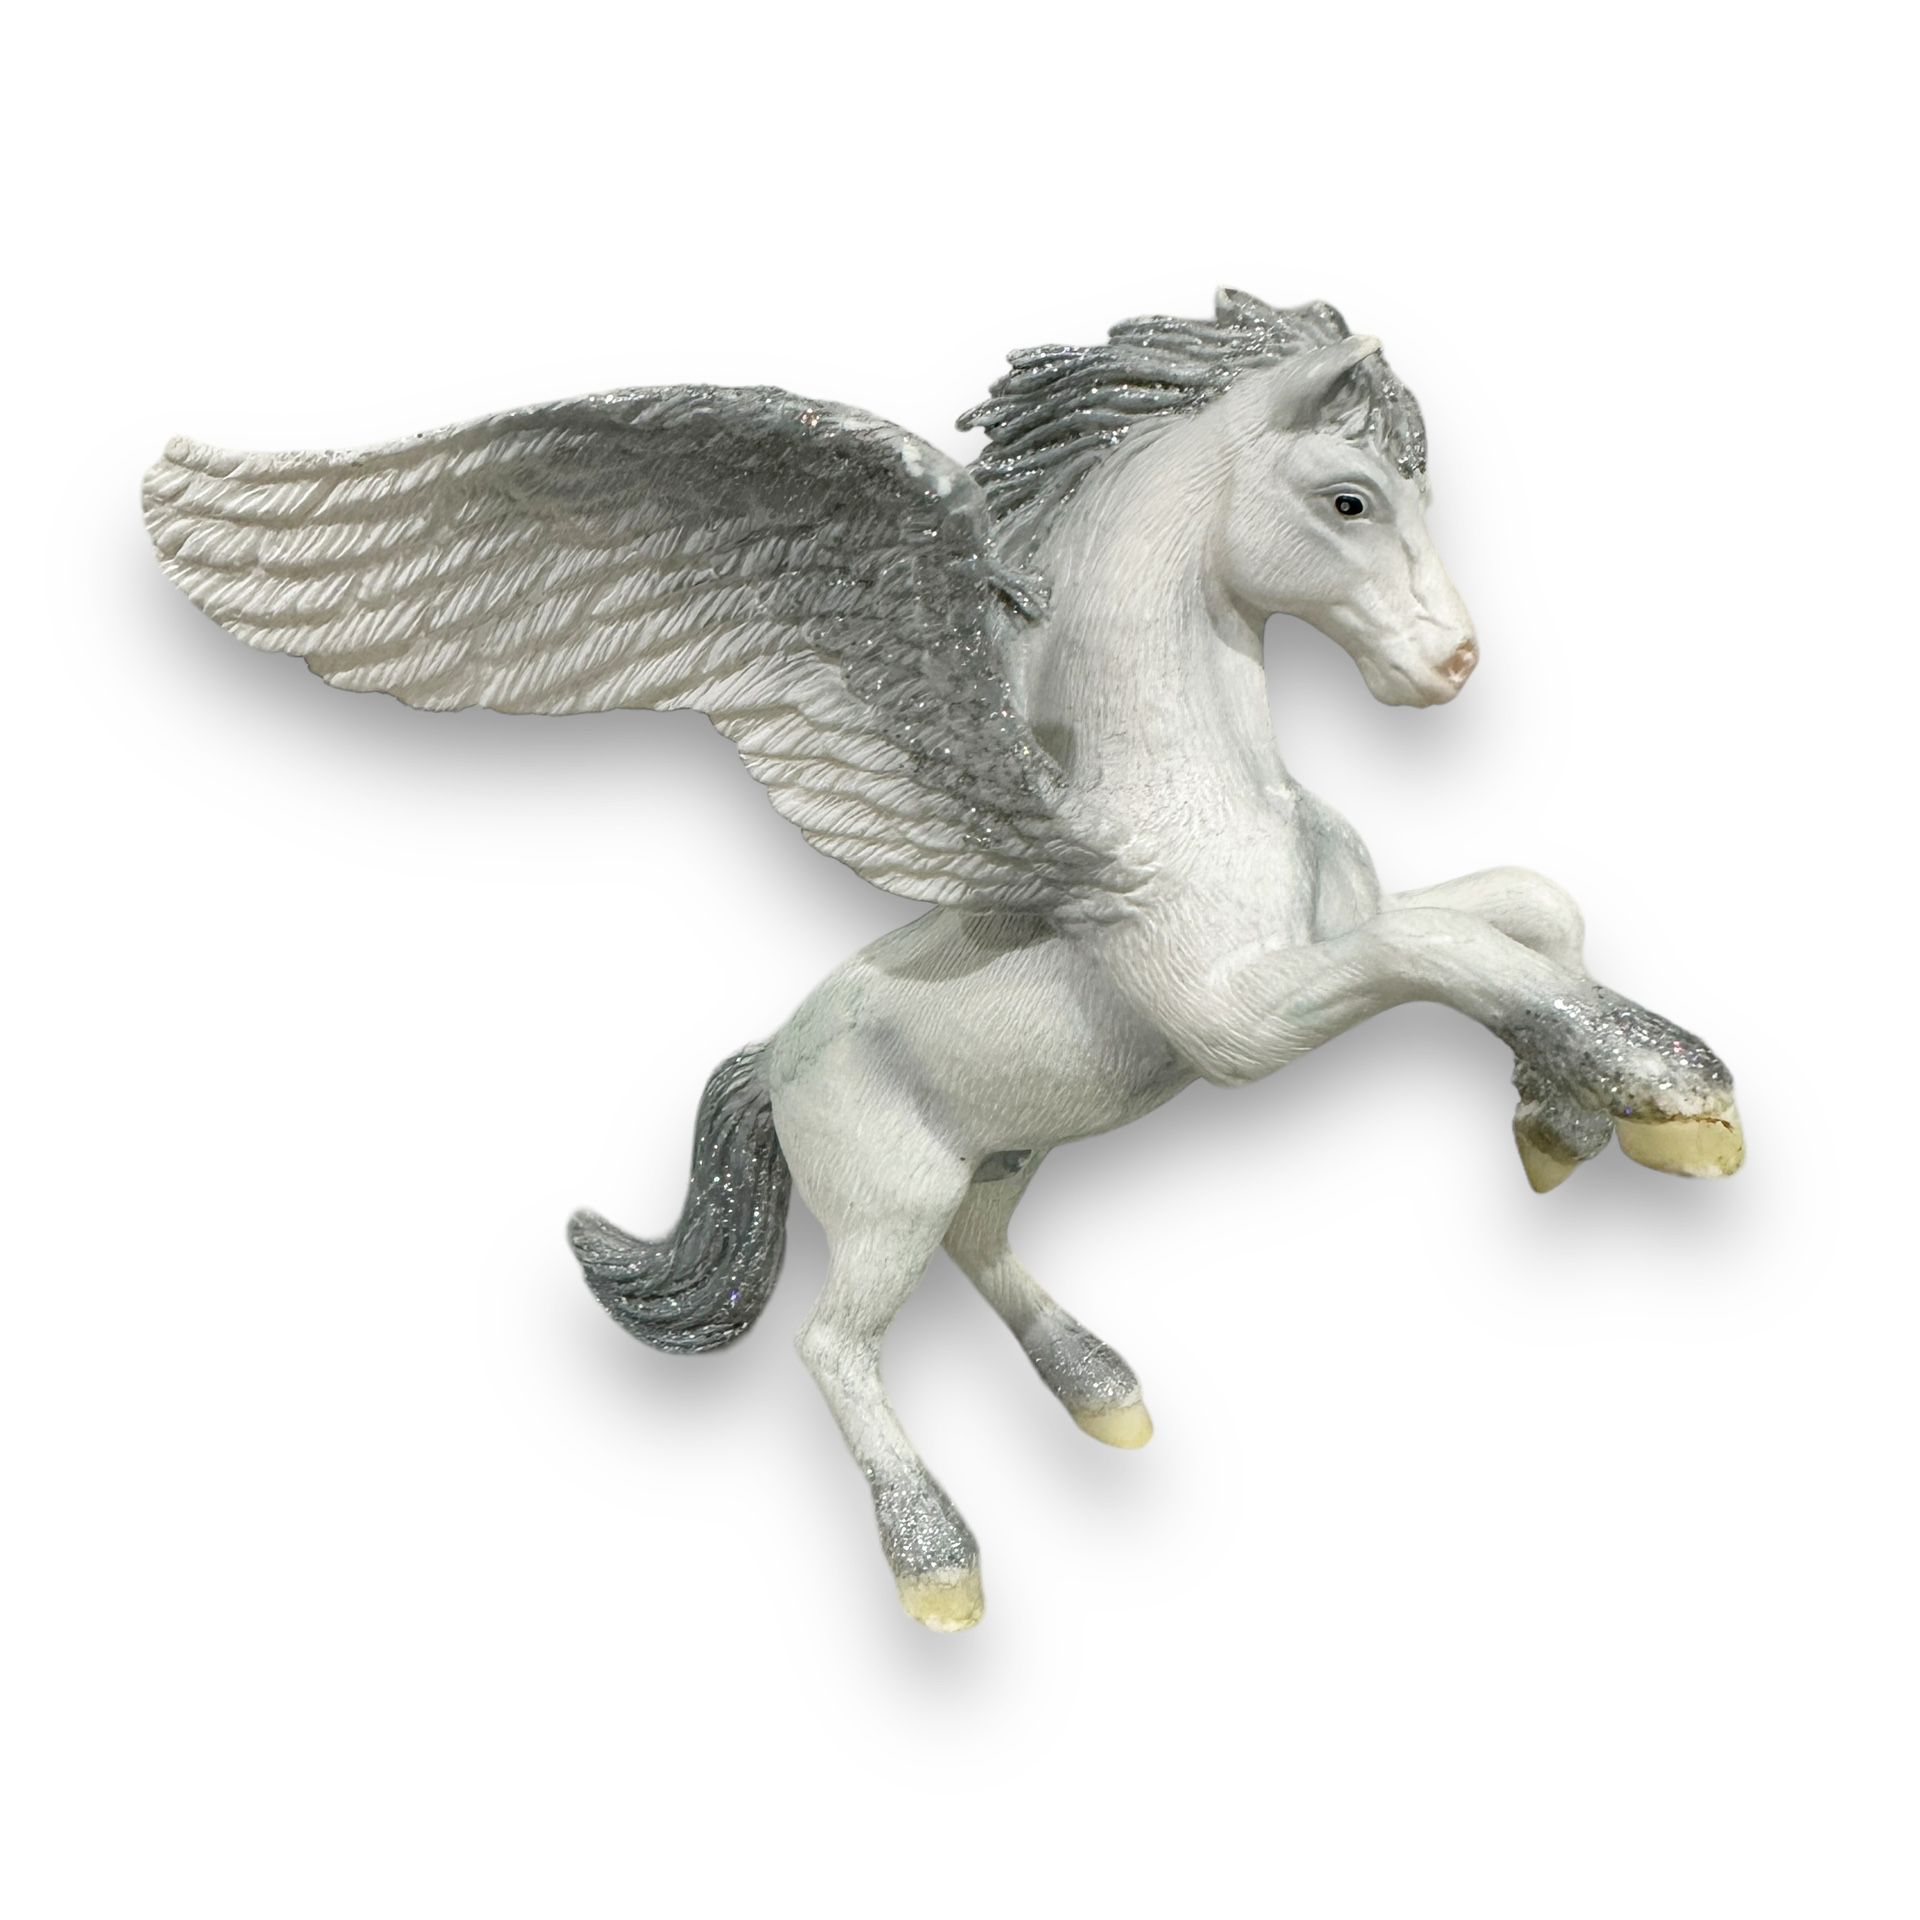 Schleich Bayala Rearing Pegasus Winged Horse 70202 Glitter Fantasy Figure 2004   Introducing the Schleich Bayala Rearing Pegasus Winged Horse 70202 Gl